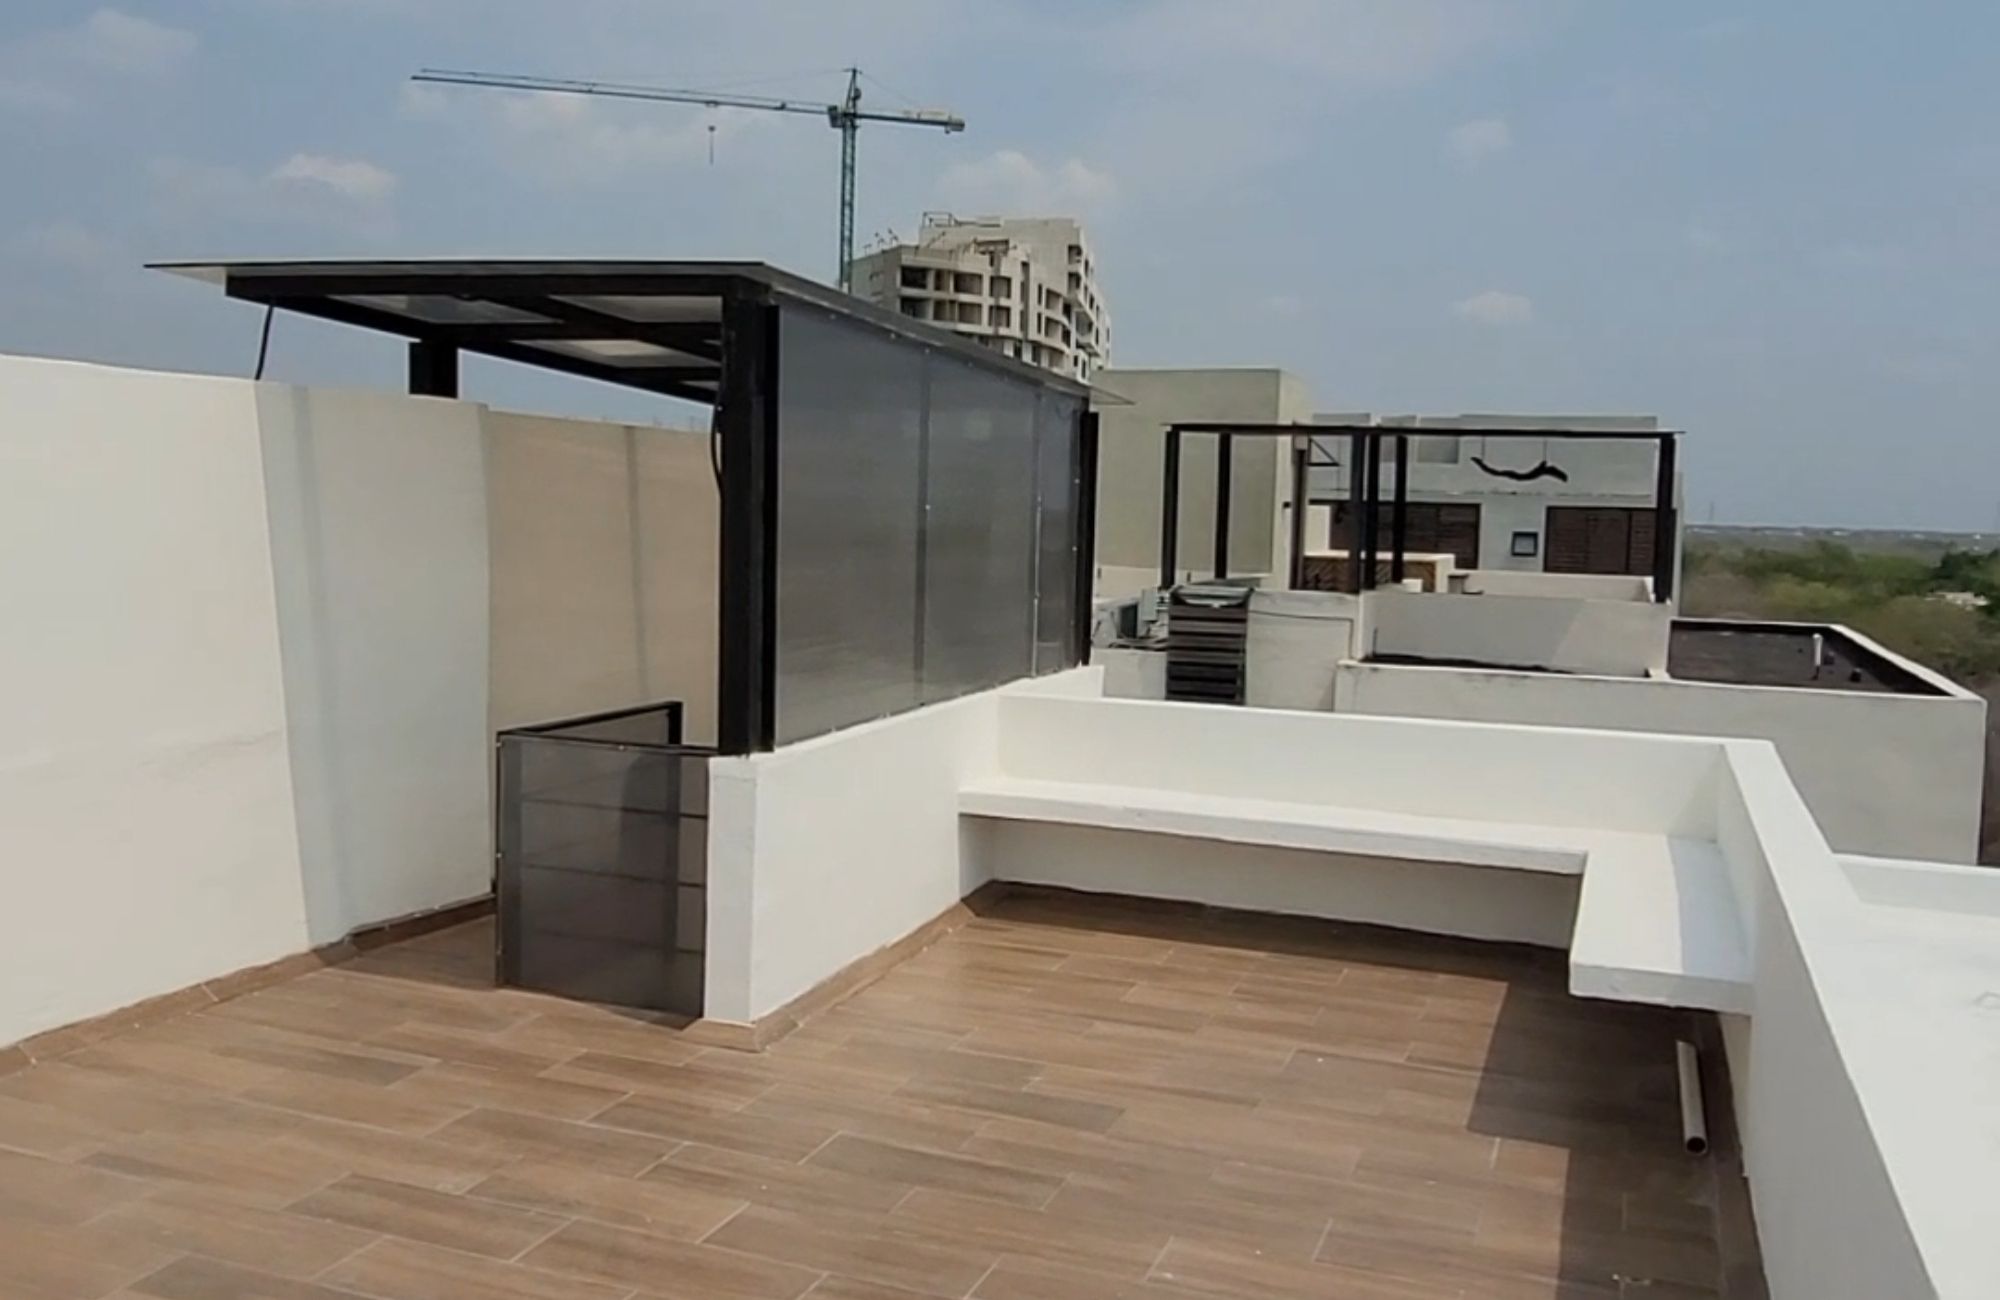 Penthouse with barbecue area, pool, pet area, cigar lounge, coworking gym and more for sale Merida Norte